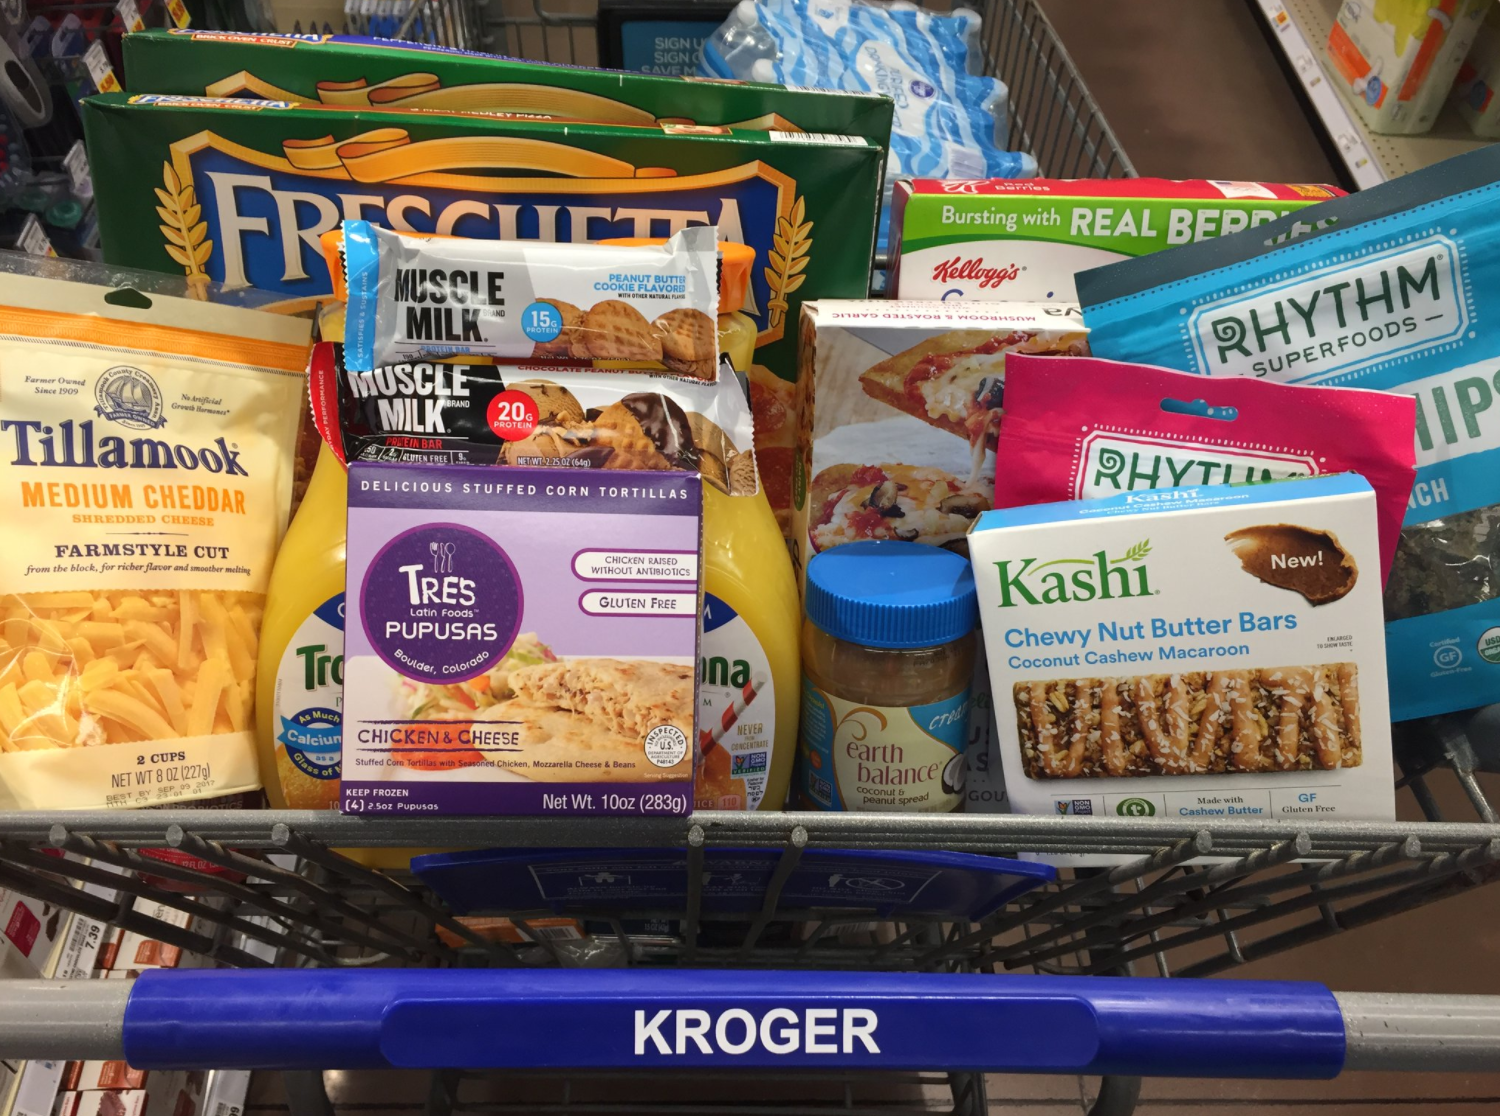 A cart full of grocery store goodies – all with Ibotta cash back